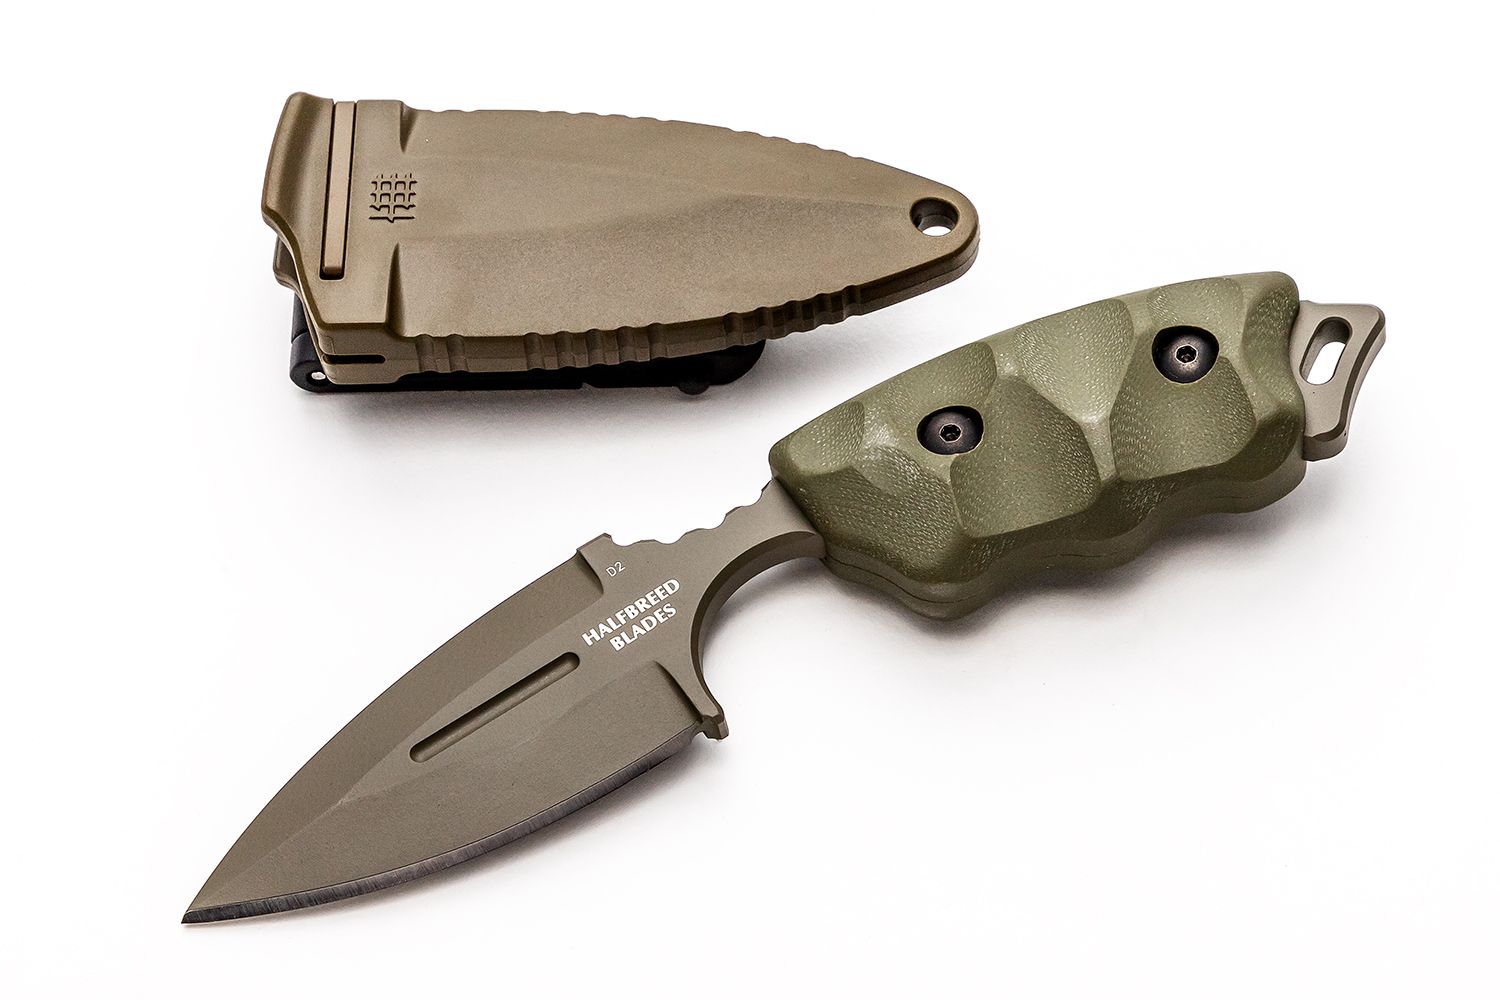 Halfbreed Blades Compact Clearance Fixed Blade Knife and Trainer Set 4.01  D2 Ranger Green Teflon Combo Edge Dagger, G10 Handles, Injection Molded  Sheath - KnifeCenter - CCK-01 BUNDLE